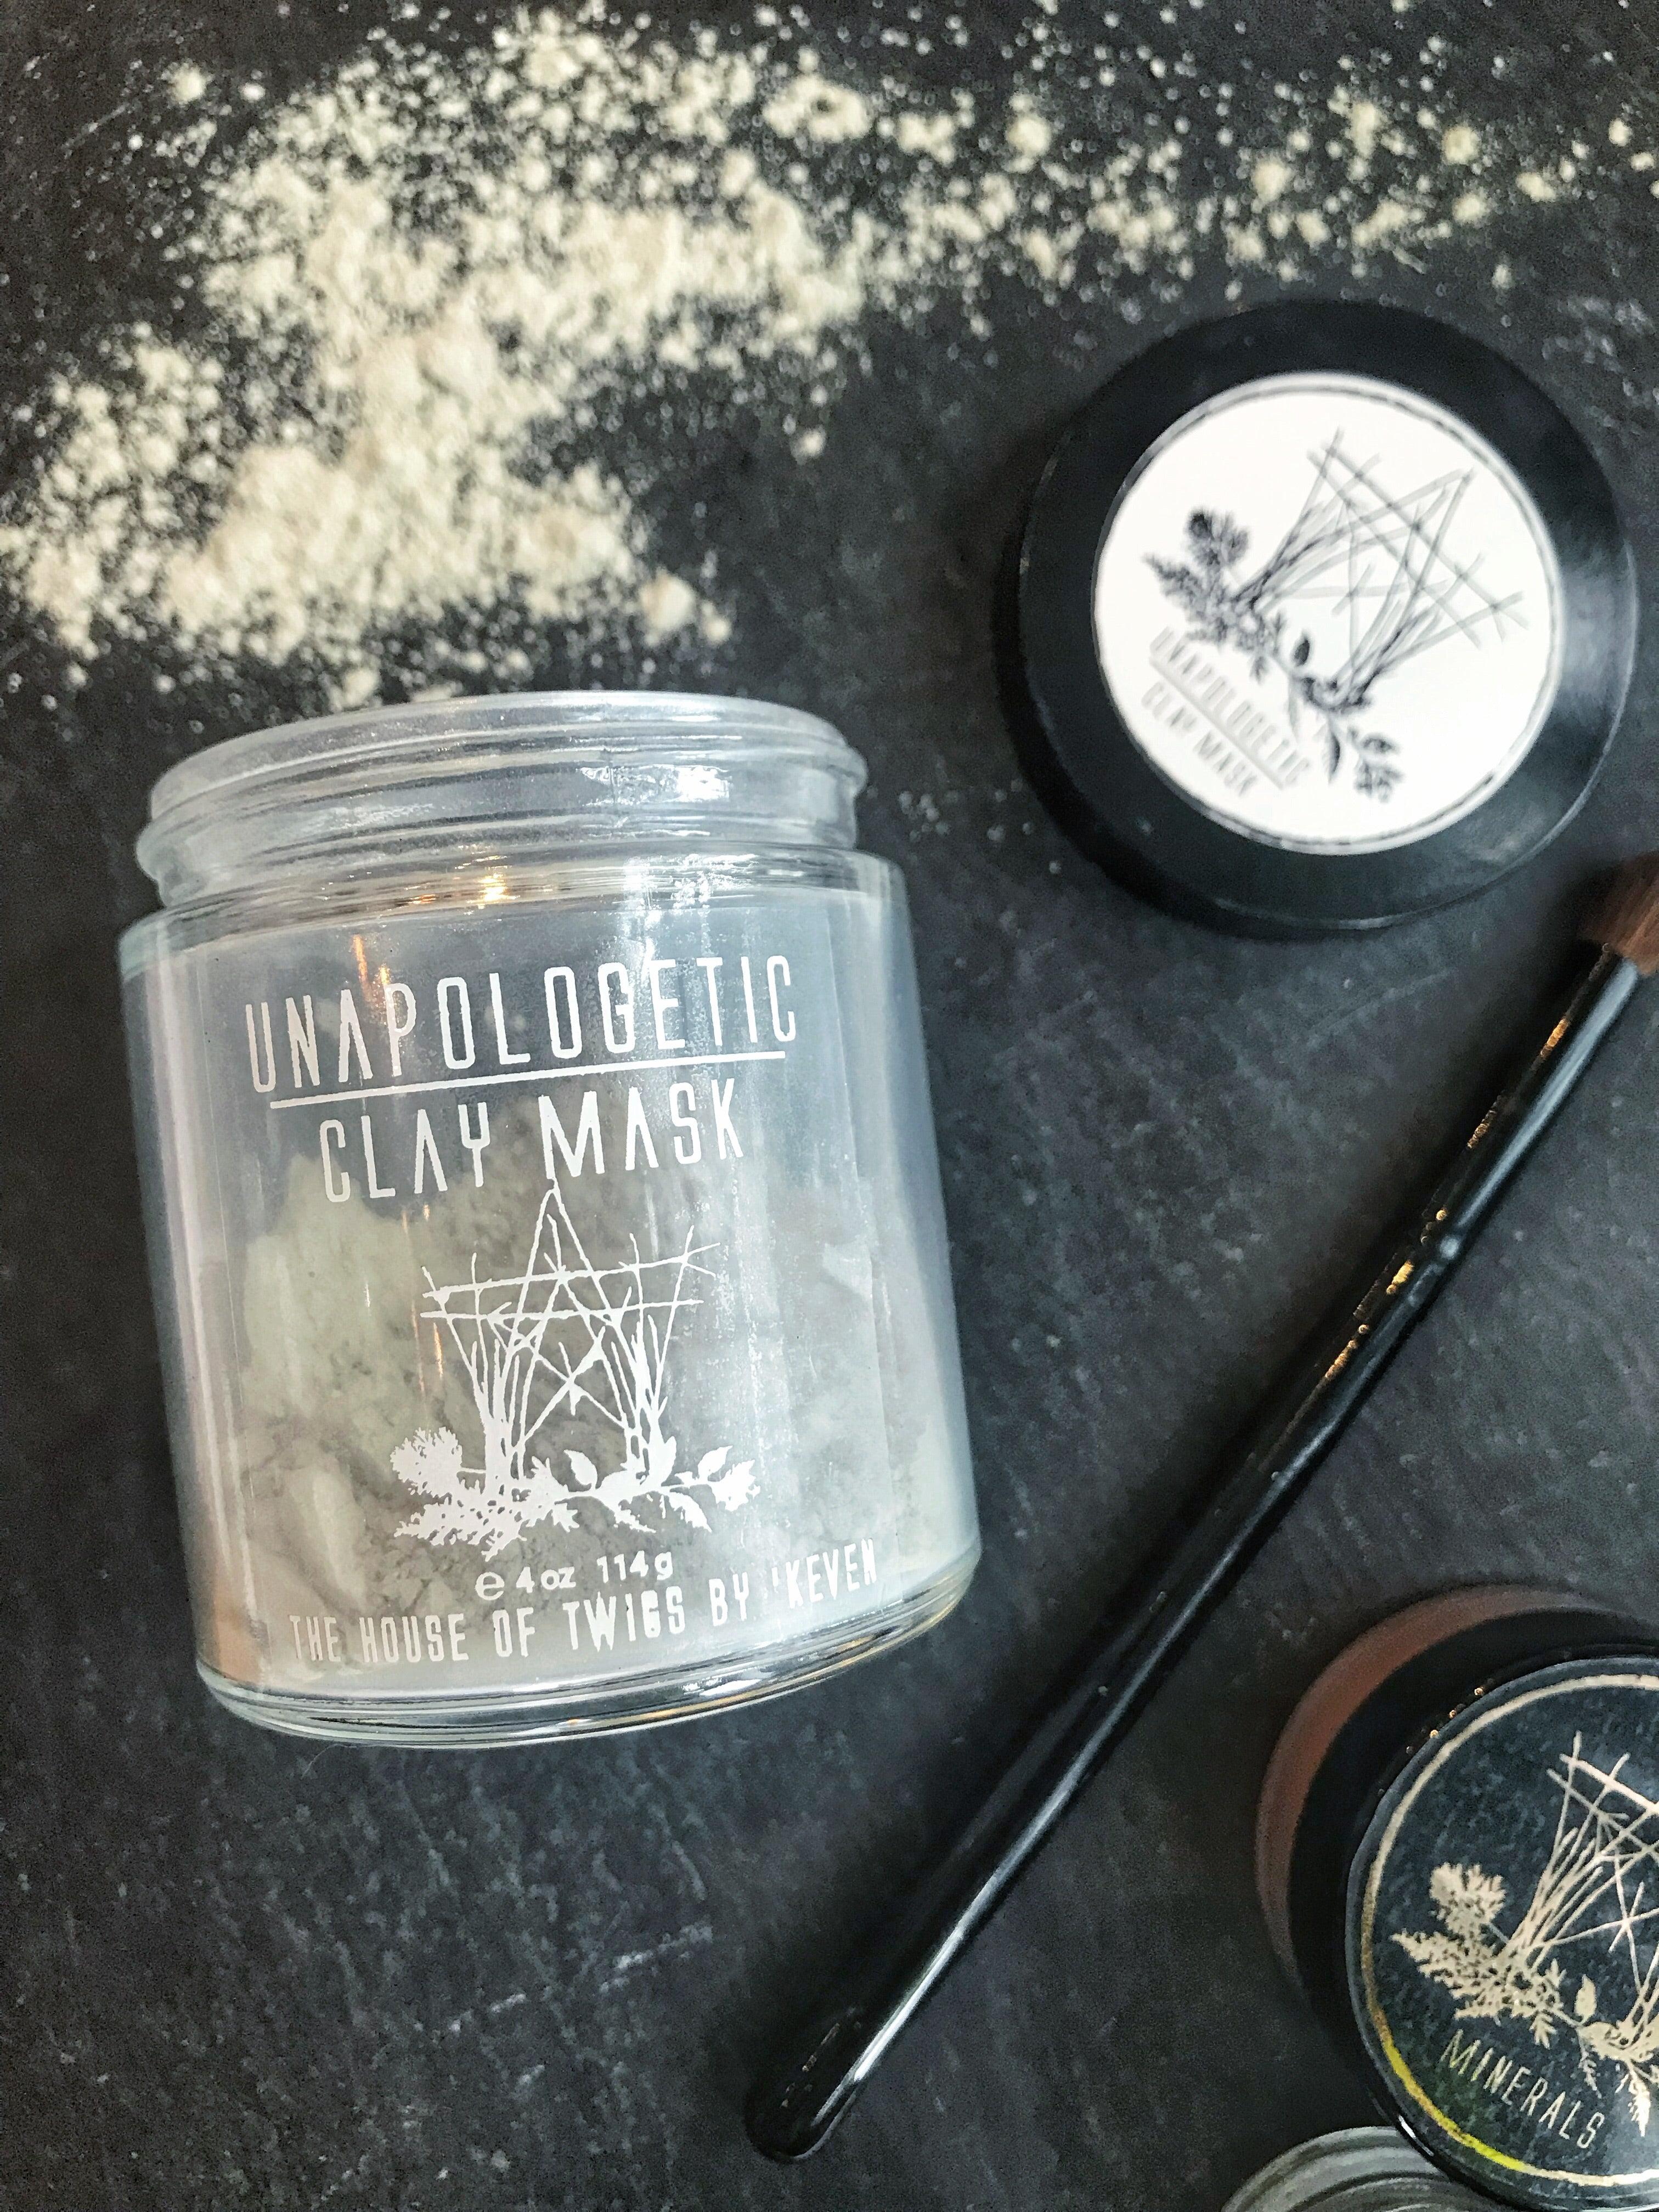 Unapologetic Clay Mask - Keven Craft Rituals